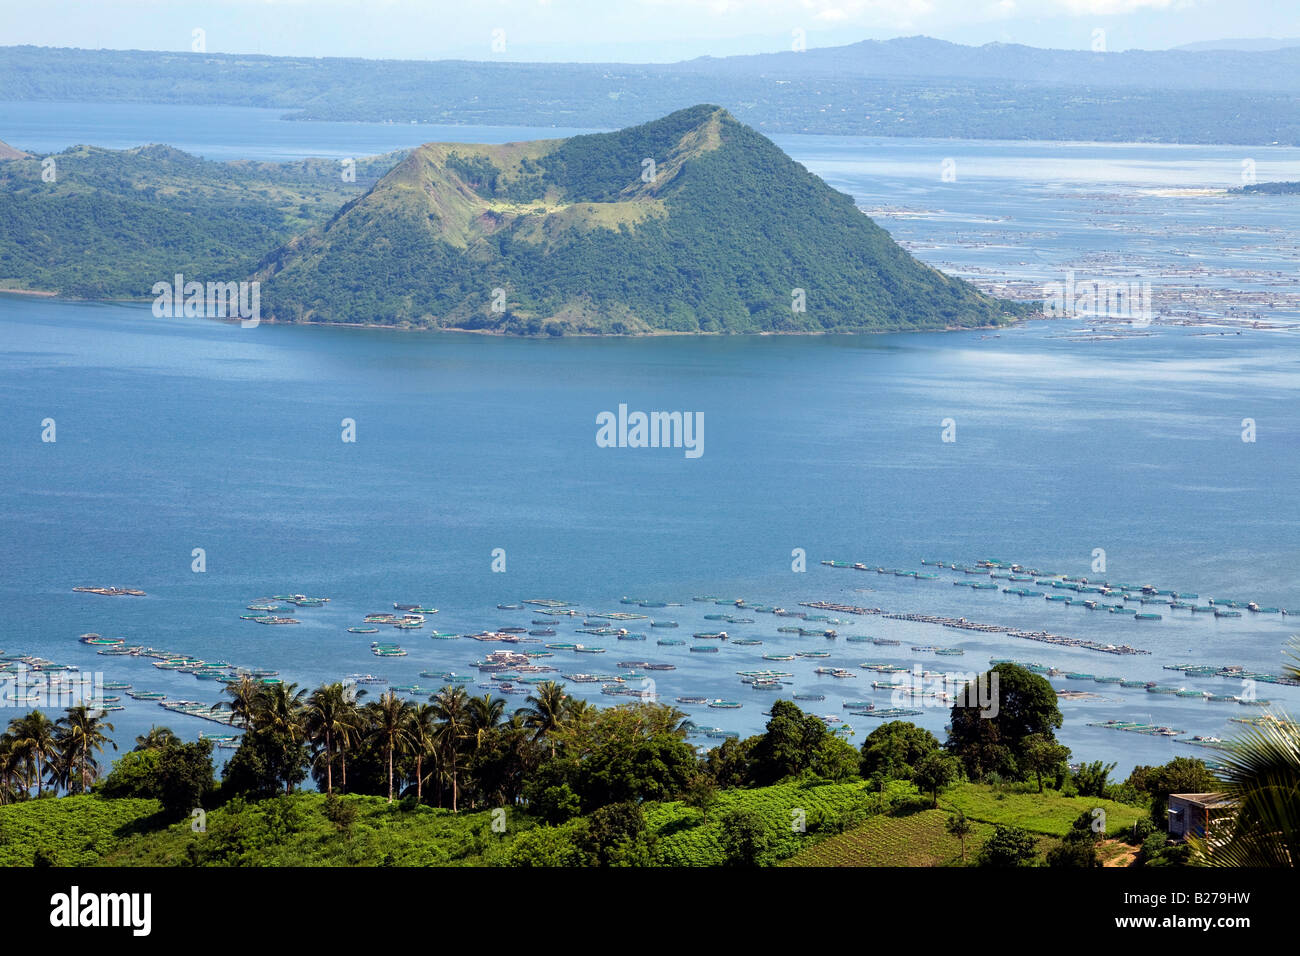 Taal Lake and a view of Volcano Island near Tagaytay City in Cavite Province of Luzon, Philippines. Stock Photo